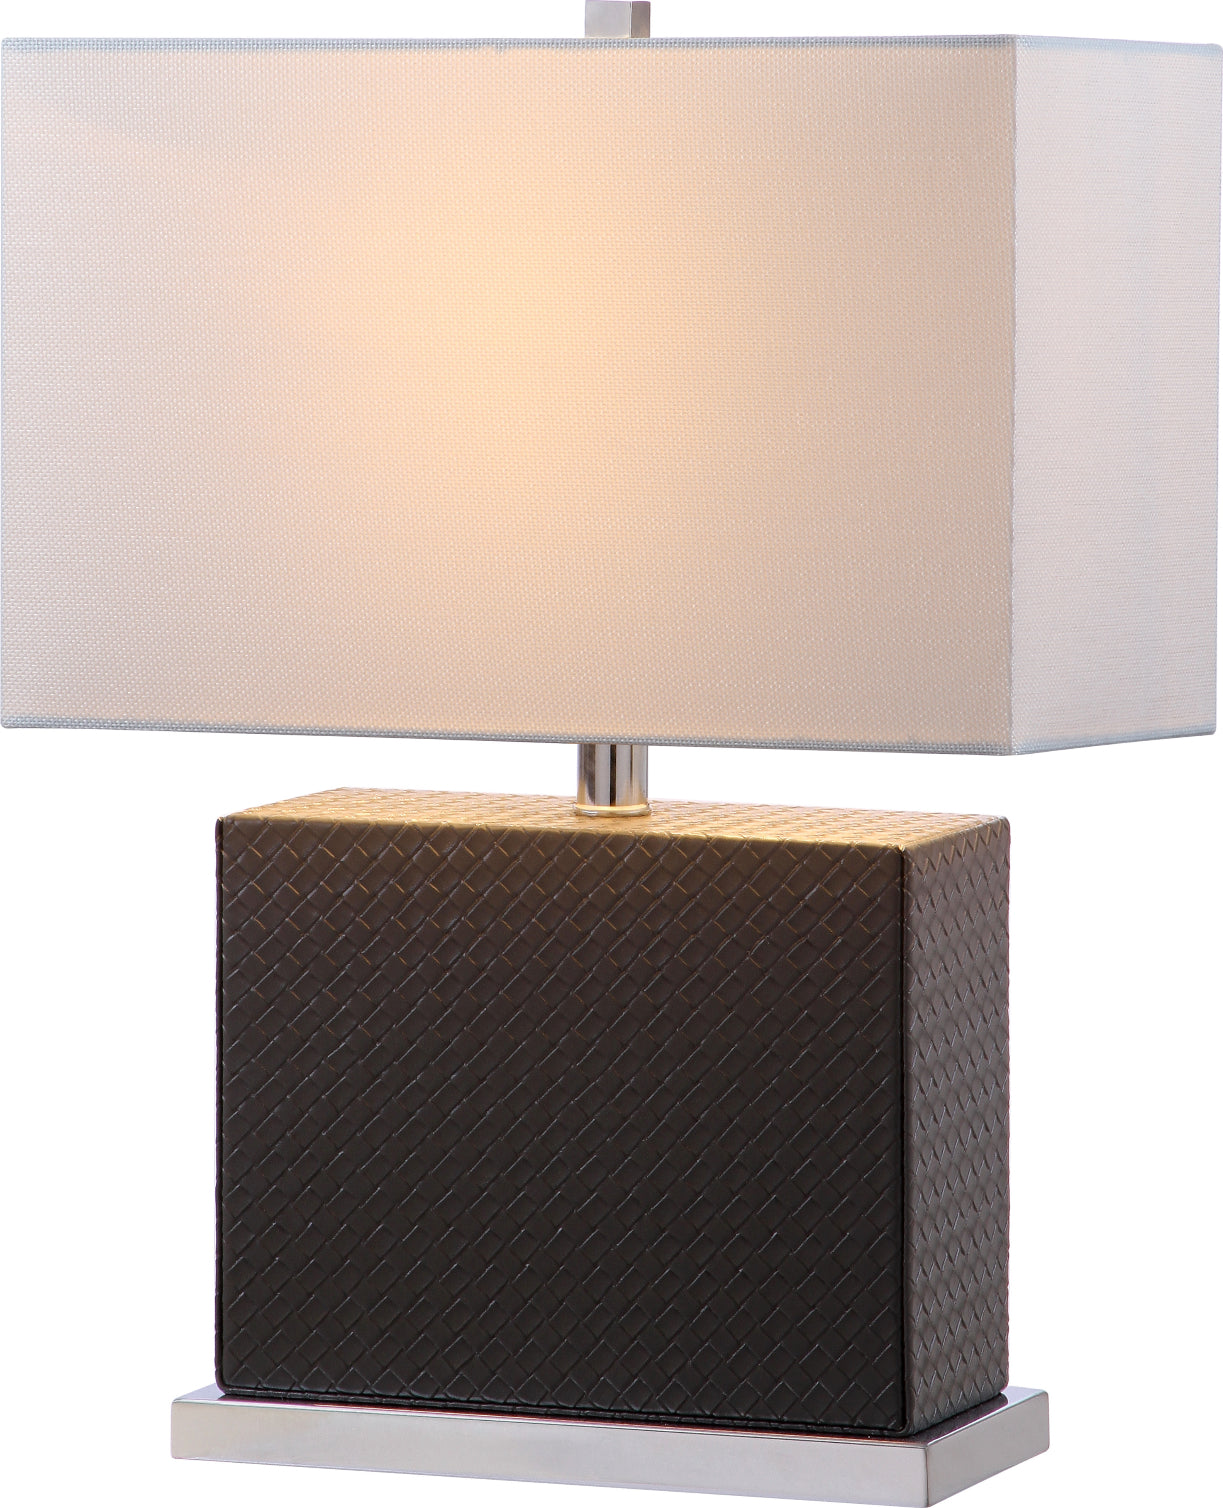 Safavieh Delia 205-Inch H Faux Woven Leather Table Lamp Grey Mirror main image